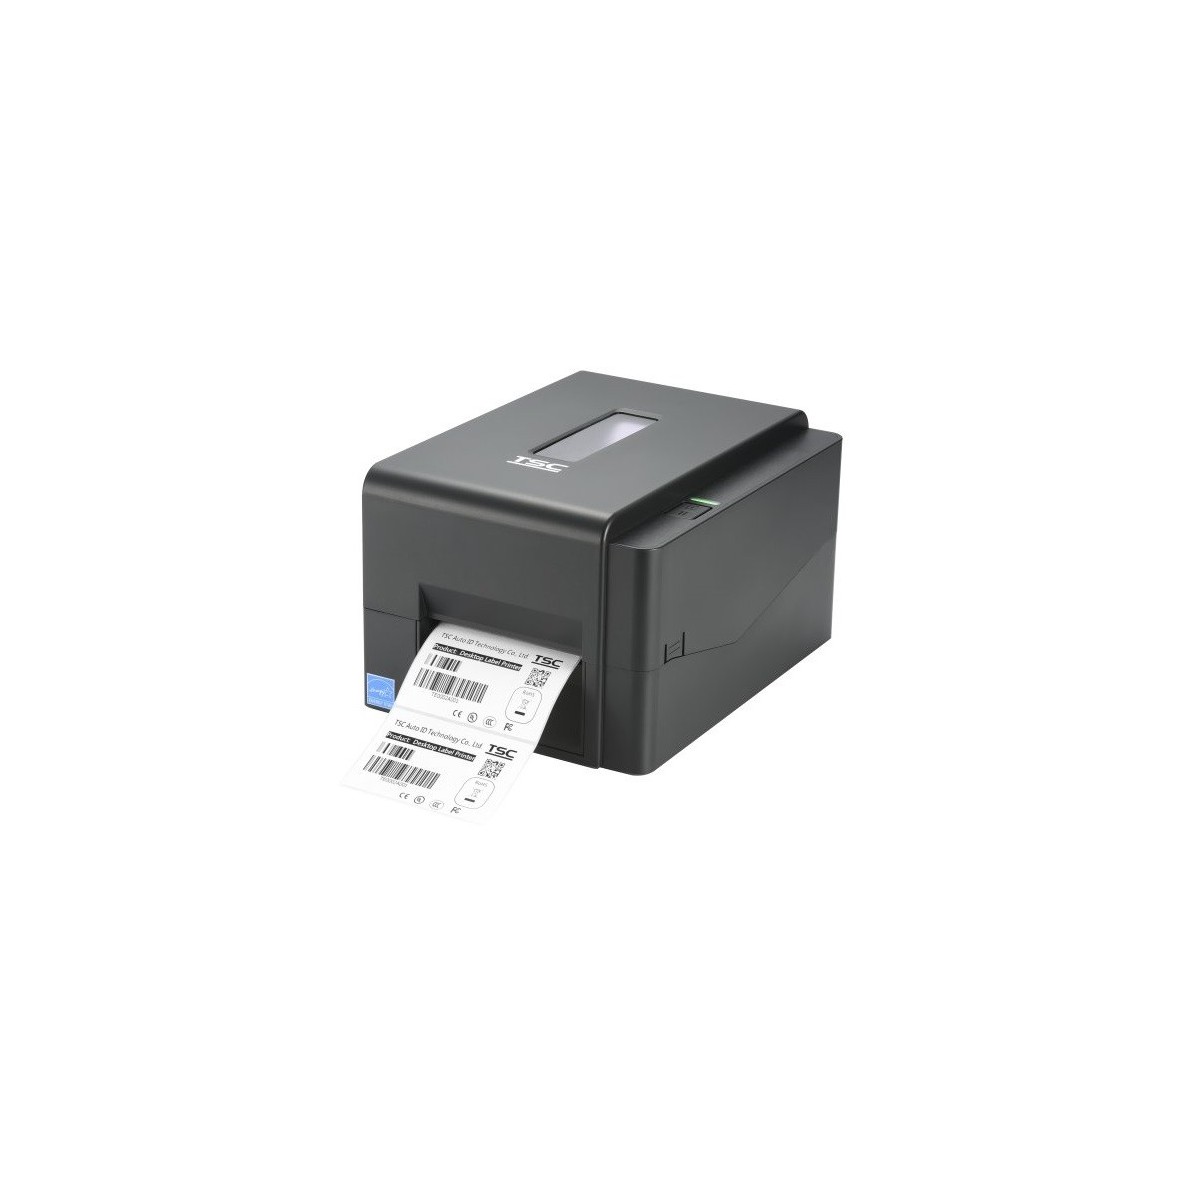 TSC TE200 - Direct thermal / Thermal transfer - 203 x 203 DPI - 152.4 mm/sec - Wired - Black